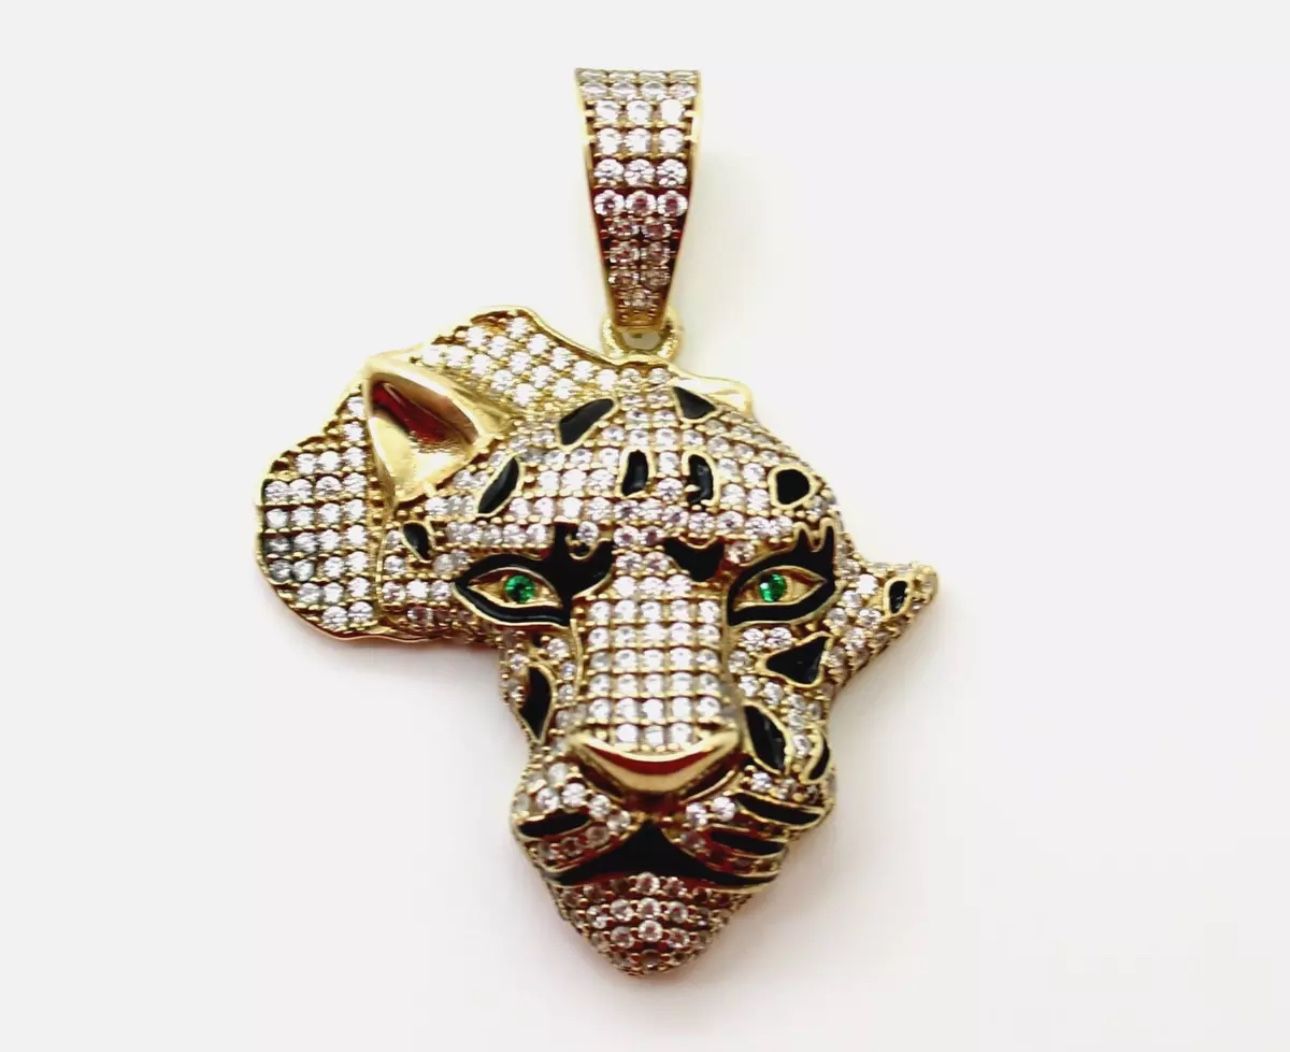 10K Yellow Gold Tiger Head & Africa Map Pendant w/Pave Cubic Zirconia Stones